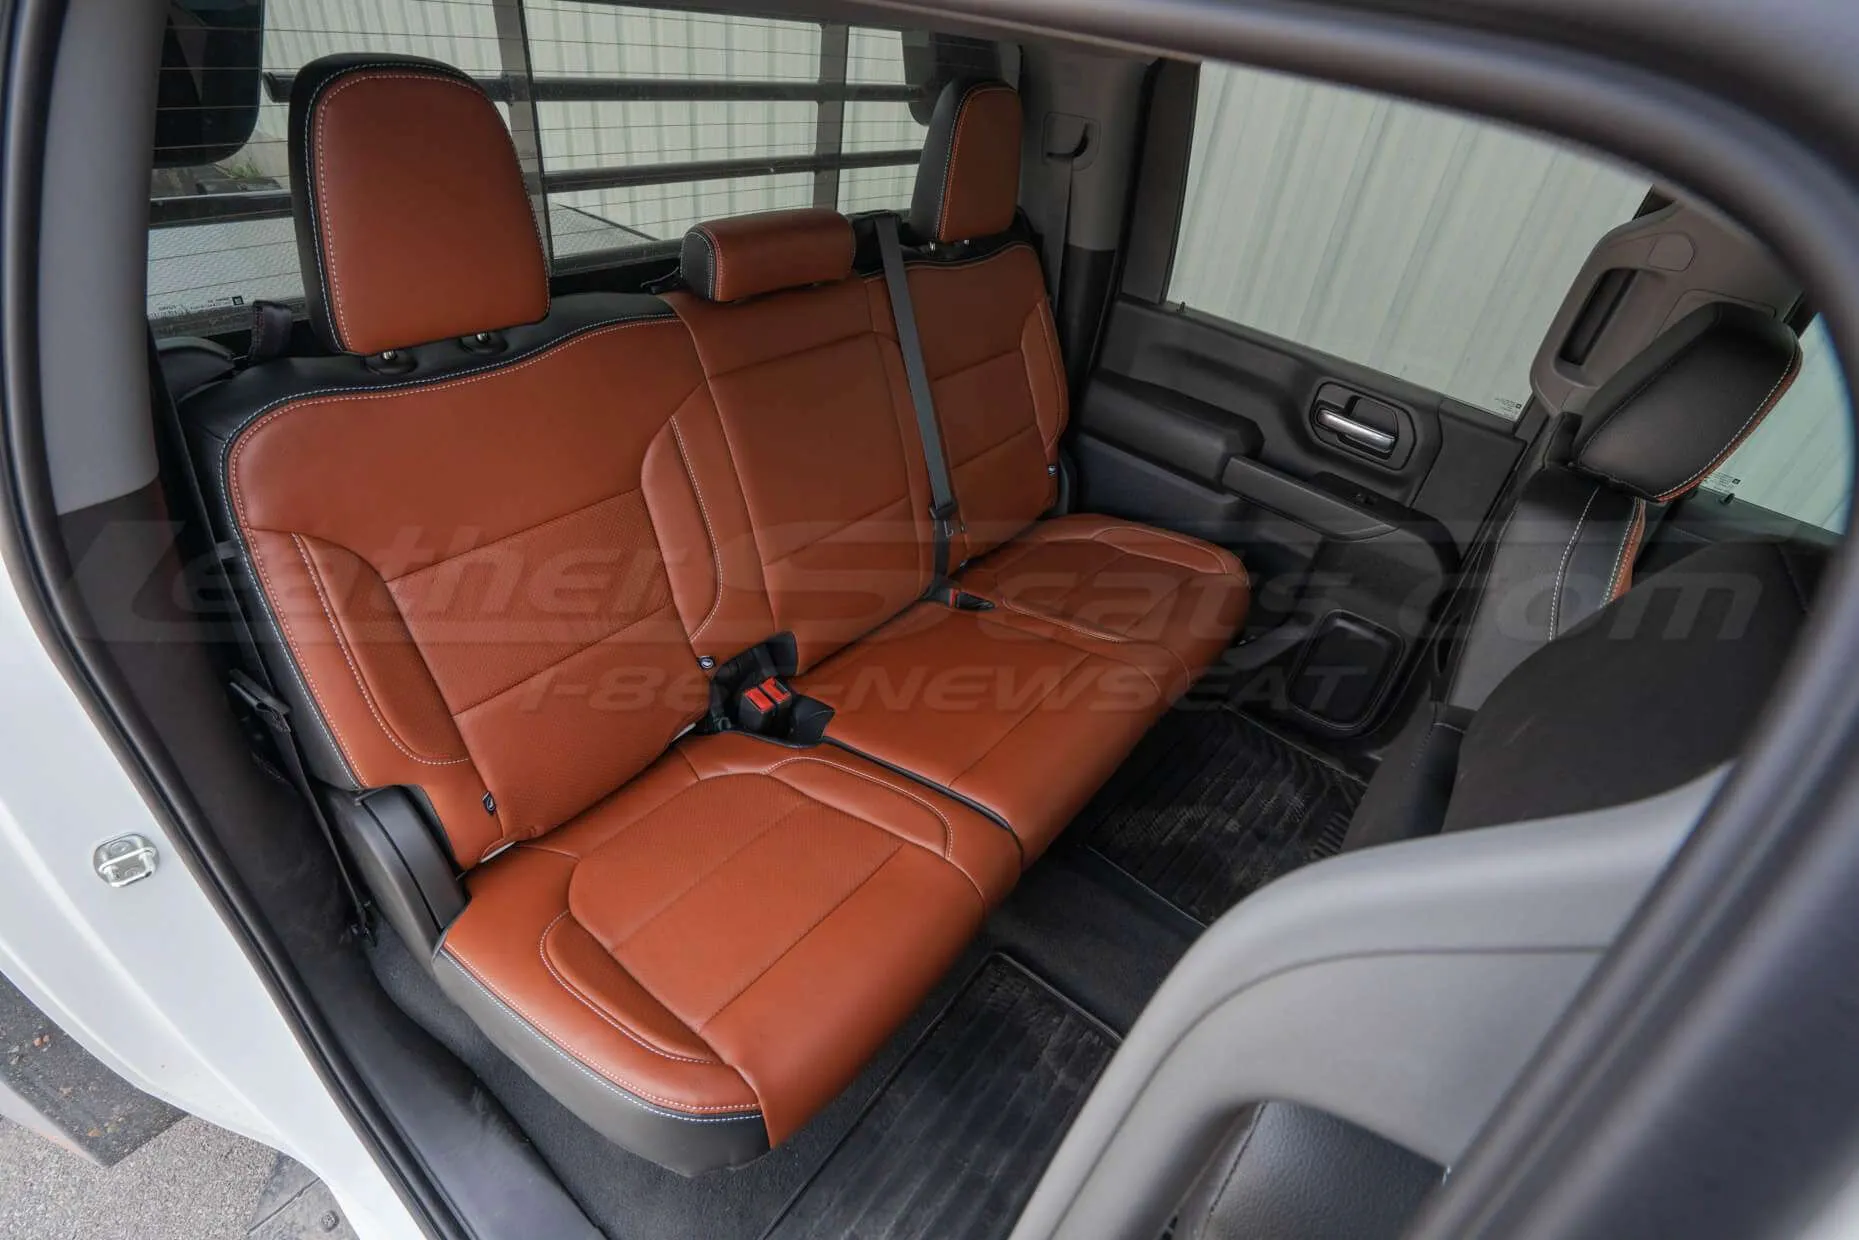 Chevy Silverado Leather Seats - Black & Mitt Brown - Rear seats from passenger side